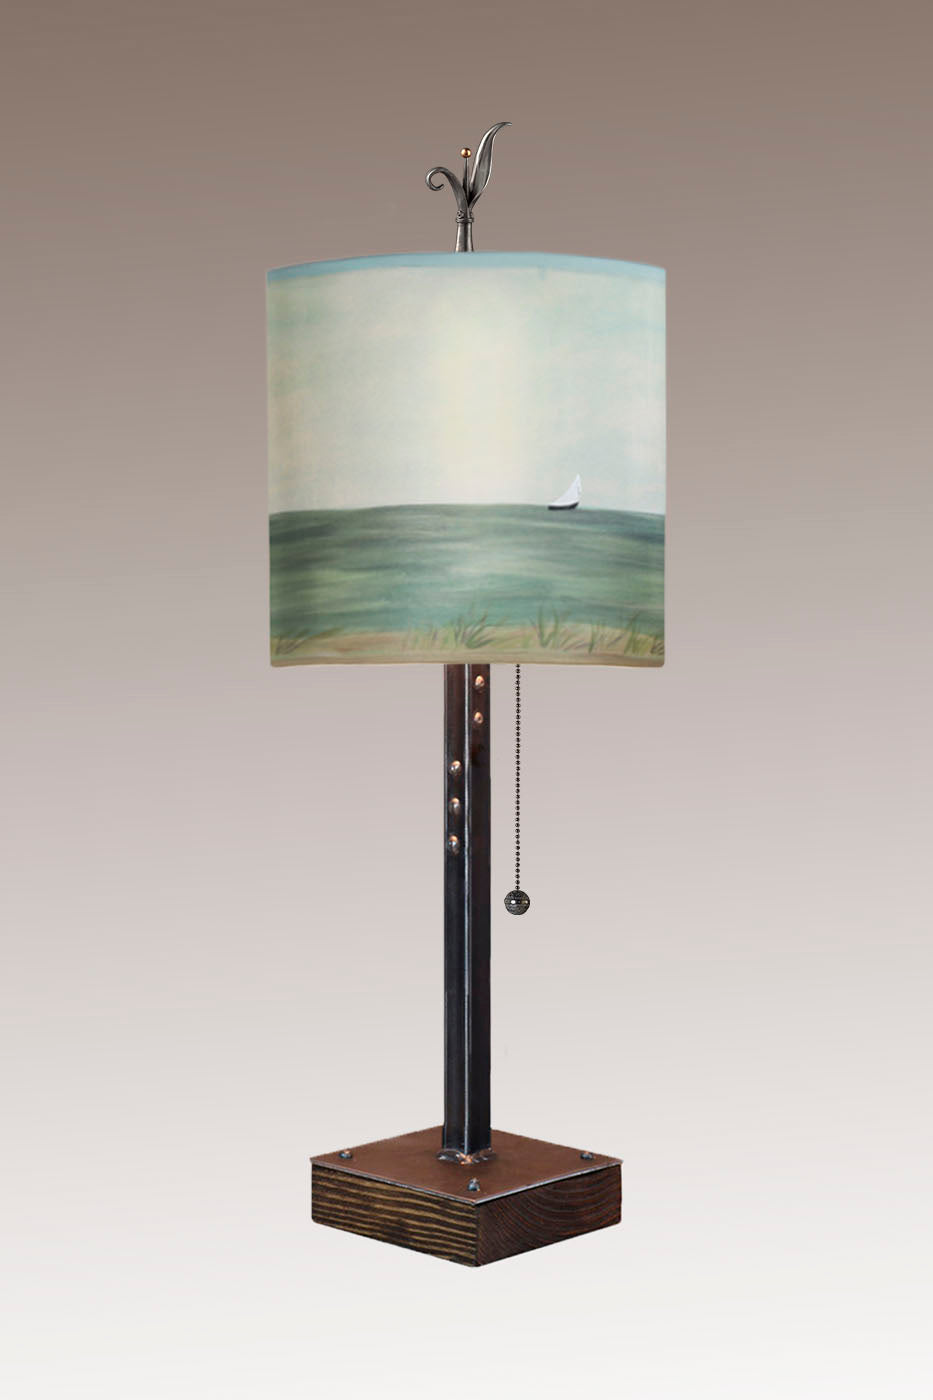 Steel Table Lamp on Wood with Medium Drum Shade in Shore